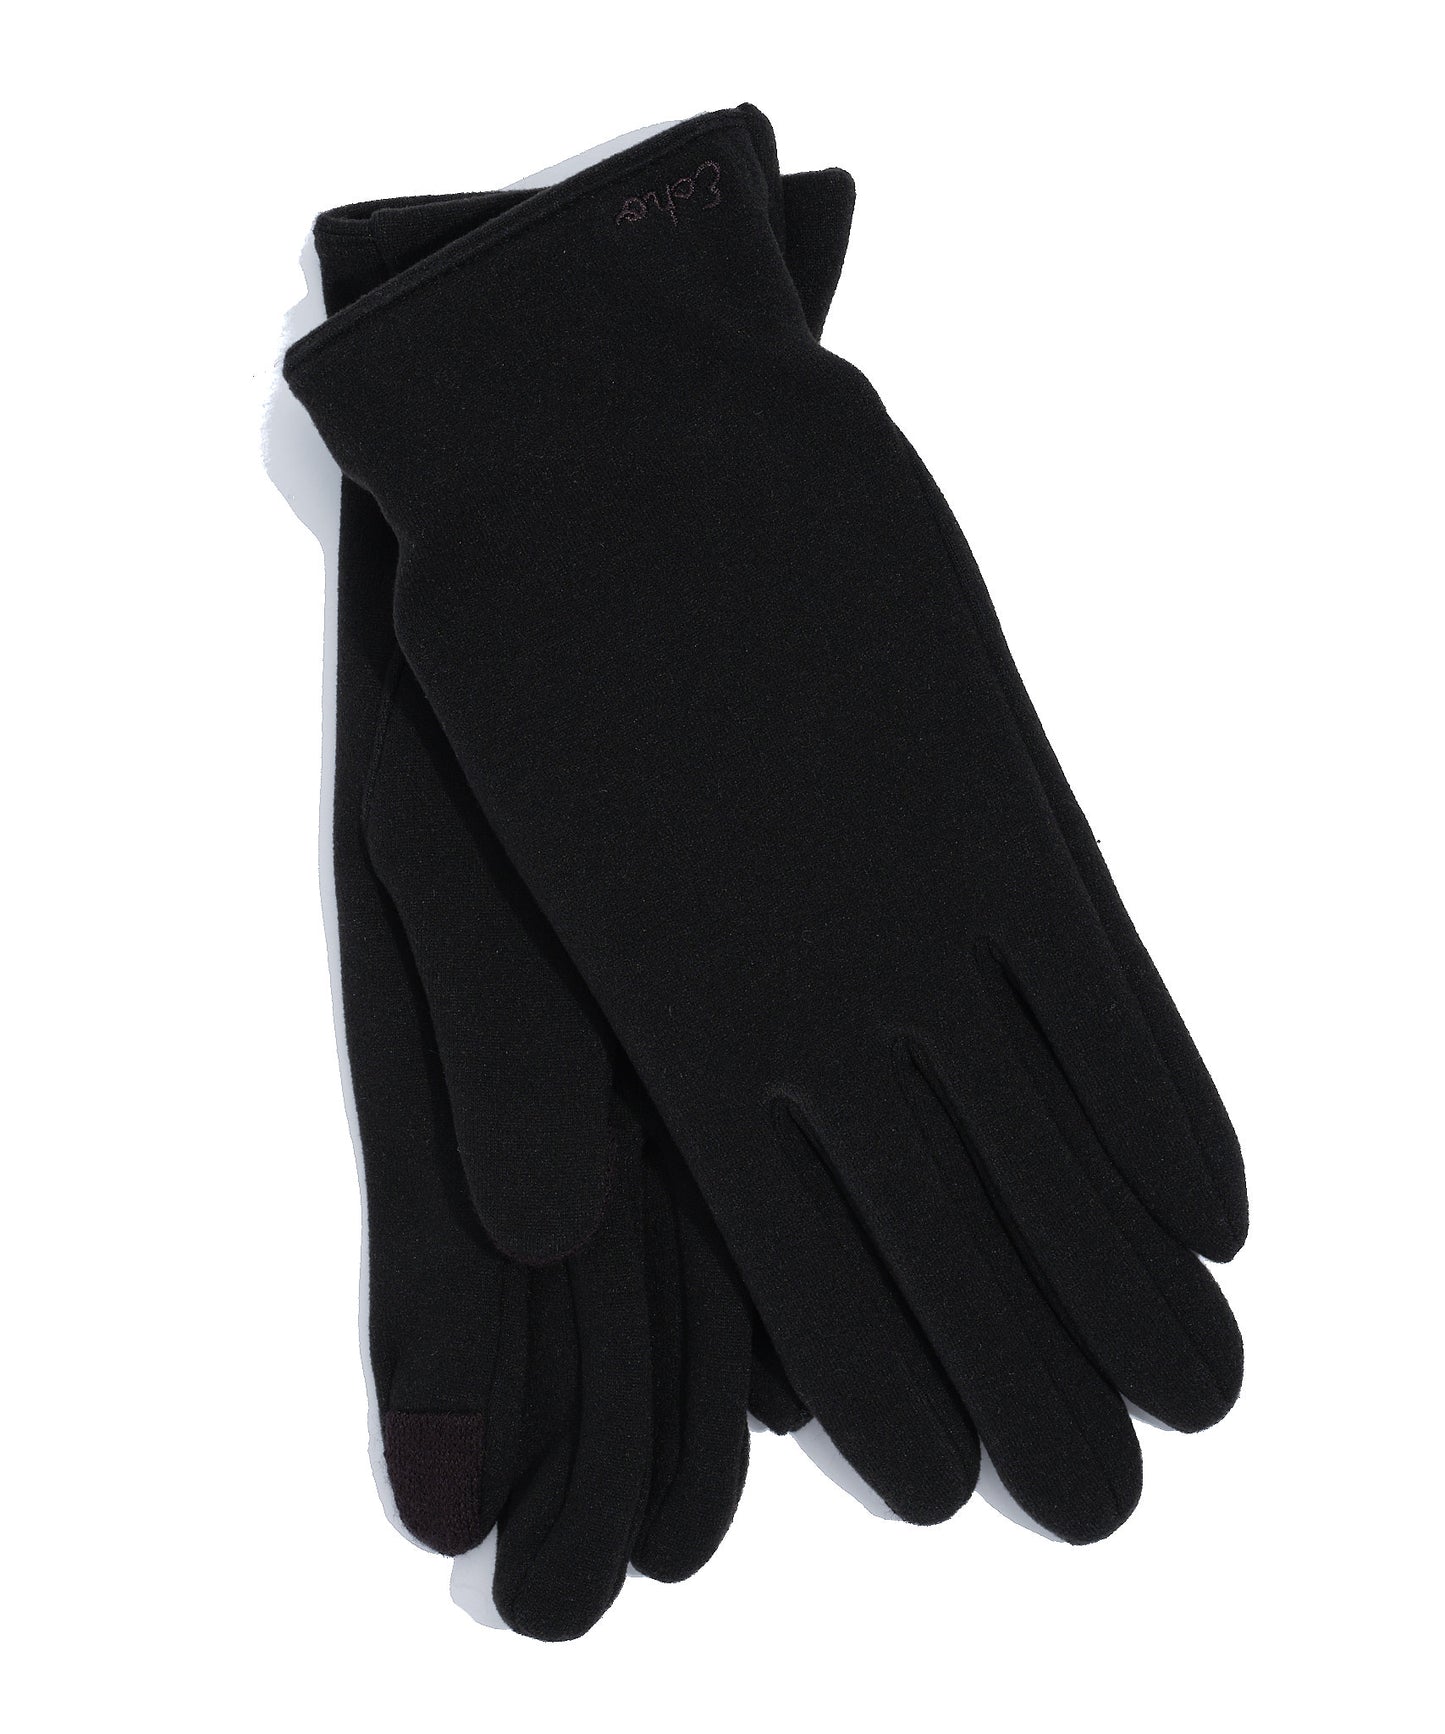 Cozy Stretch Touch Glove in color Black